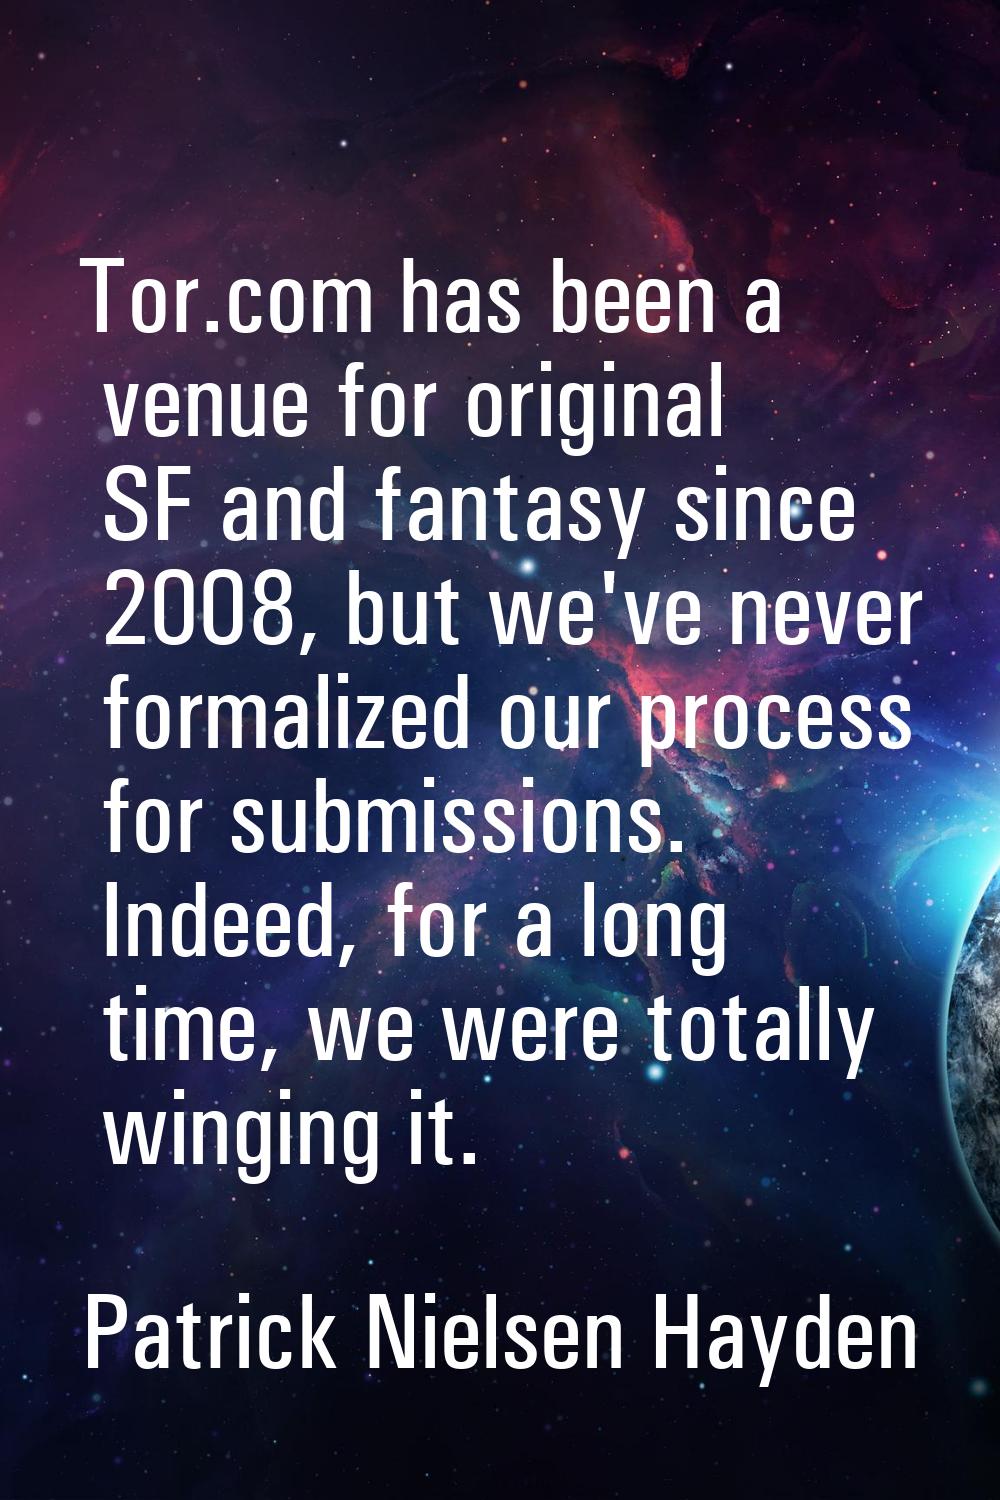 Tor.com has been a venue for original SF and fantasy since 2008, but we've never formalized our pro